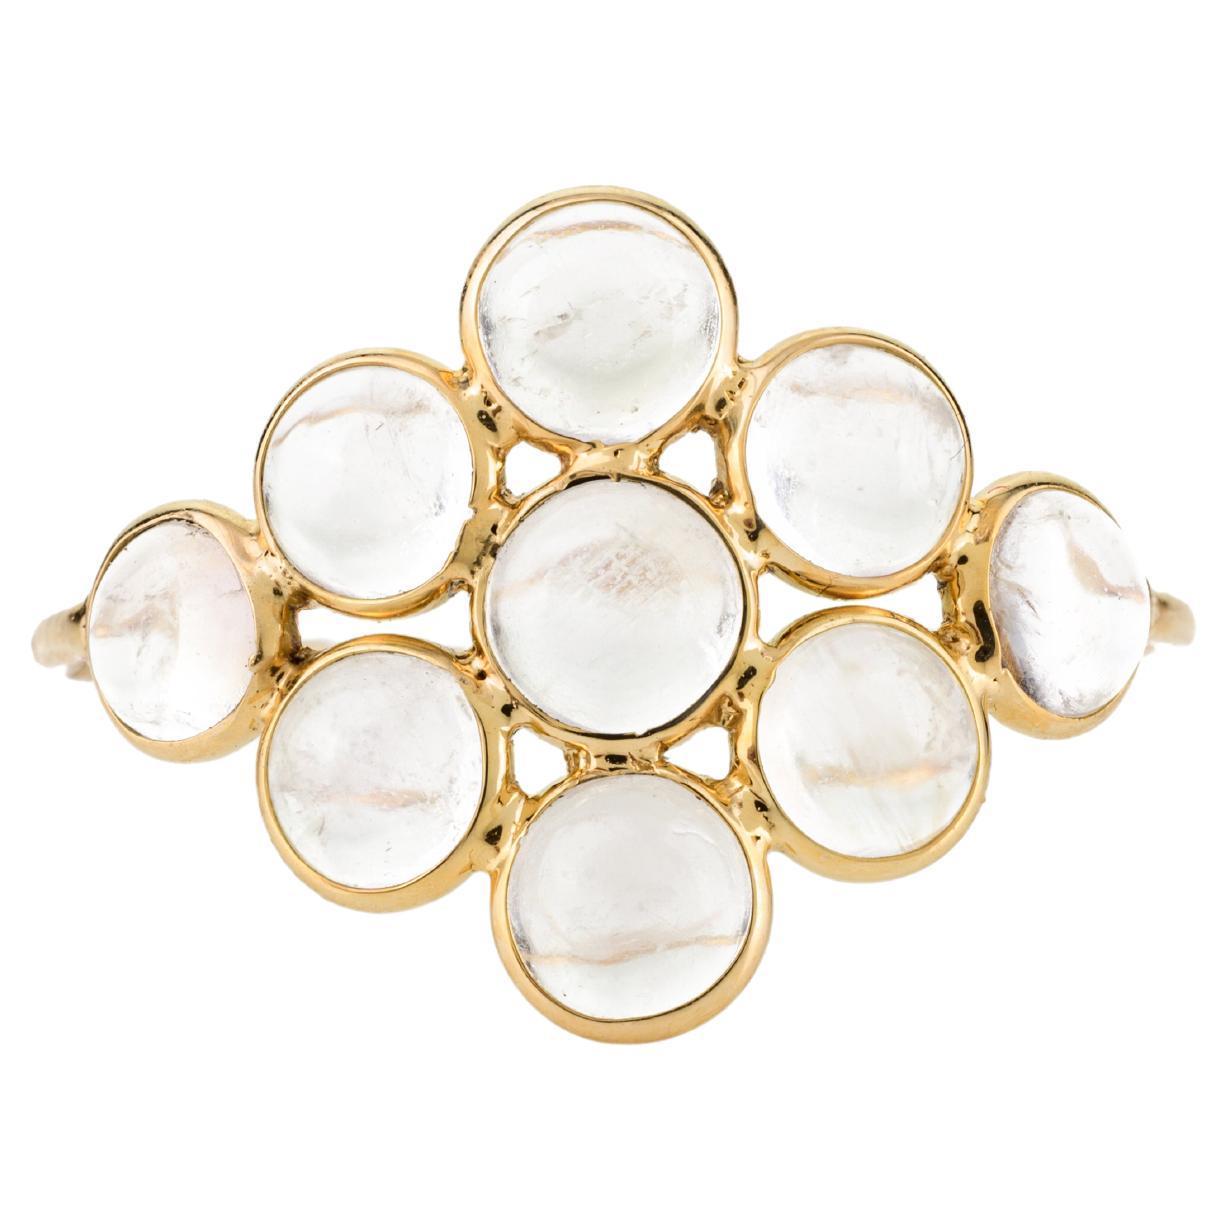 For Sale:  Everyday Rainbow Moonstone Cluster Ring in 18k Solid Yellow Gold